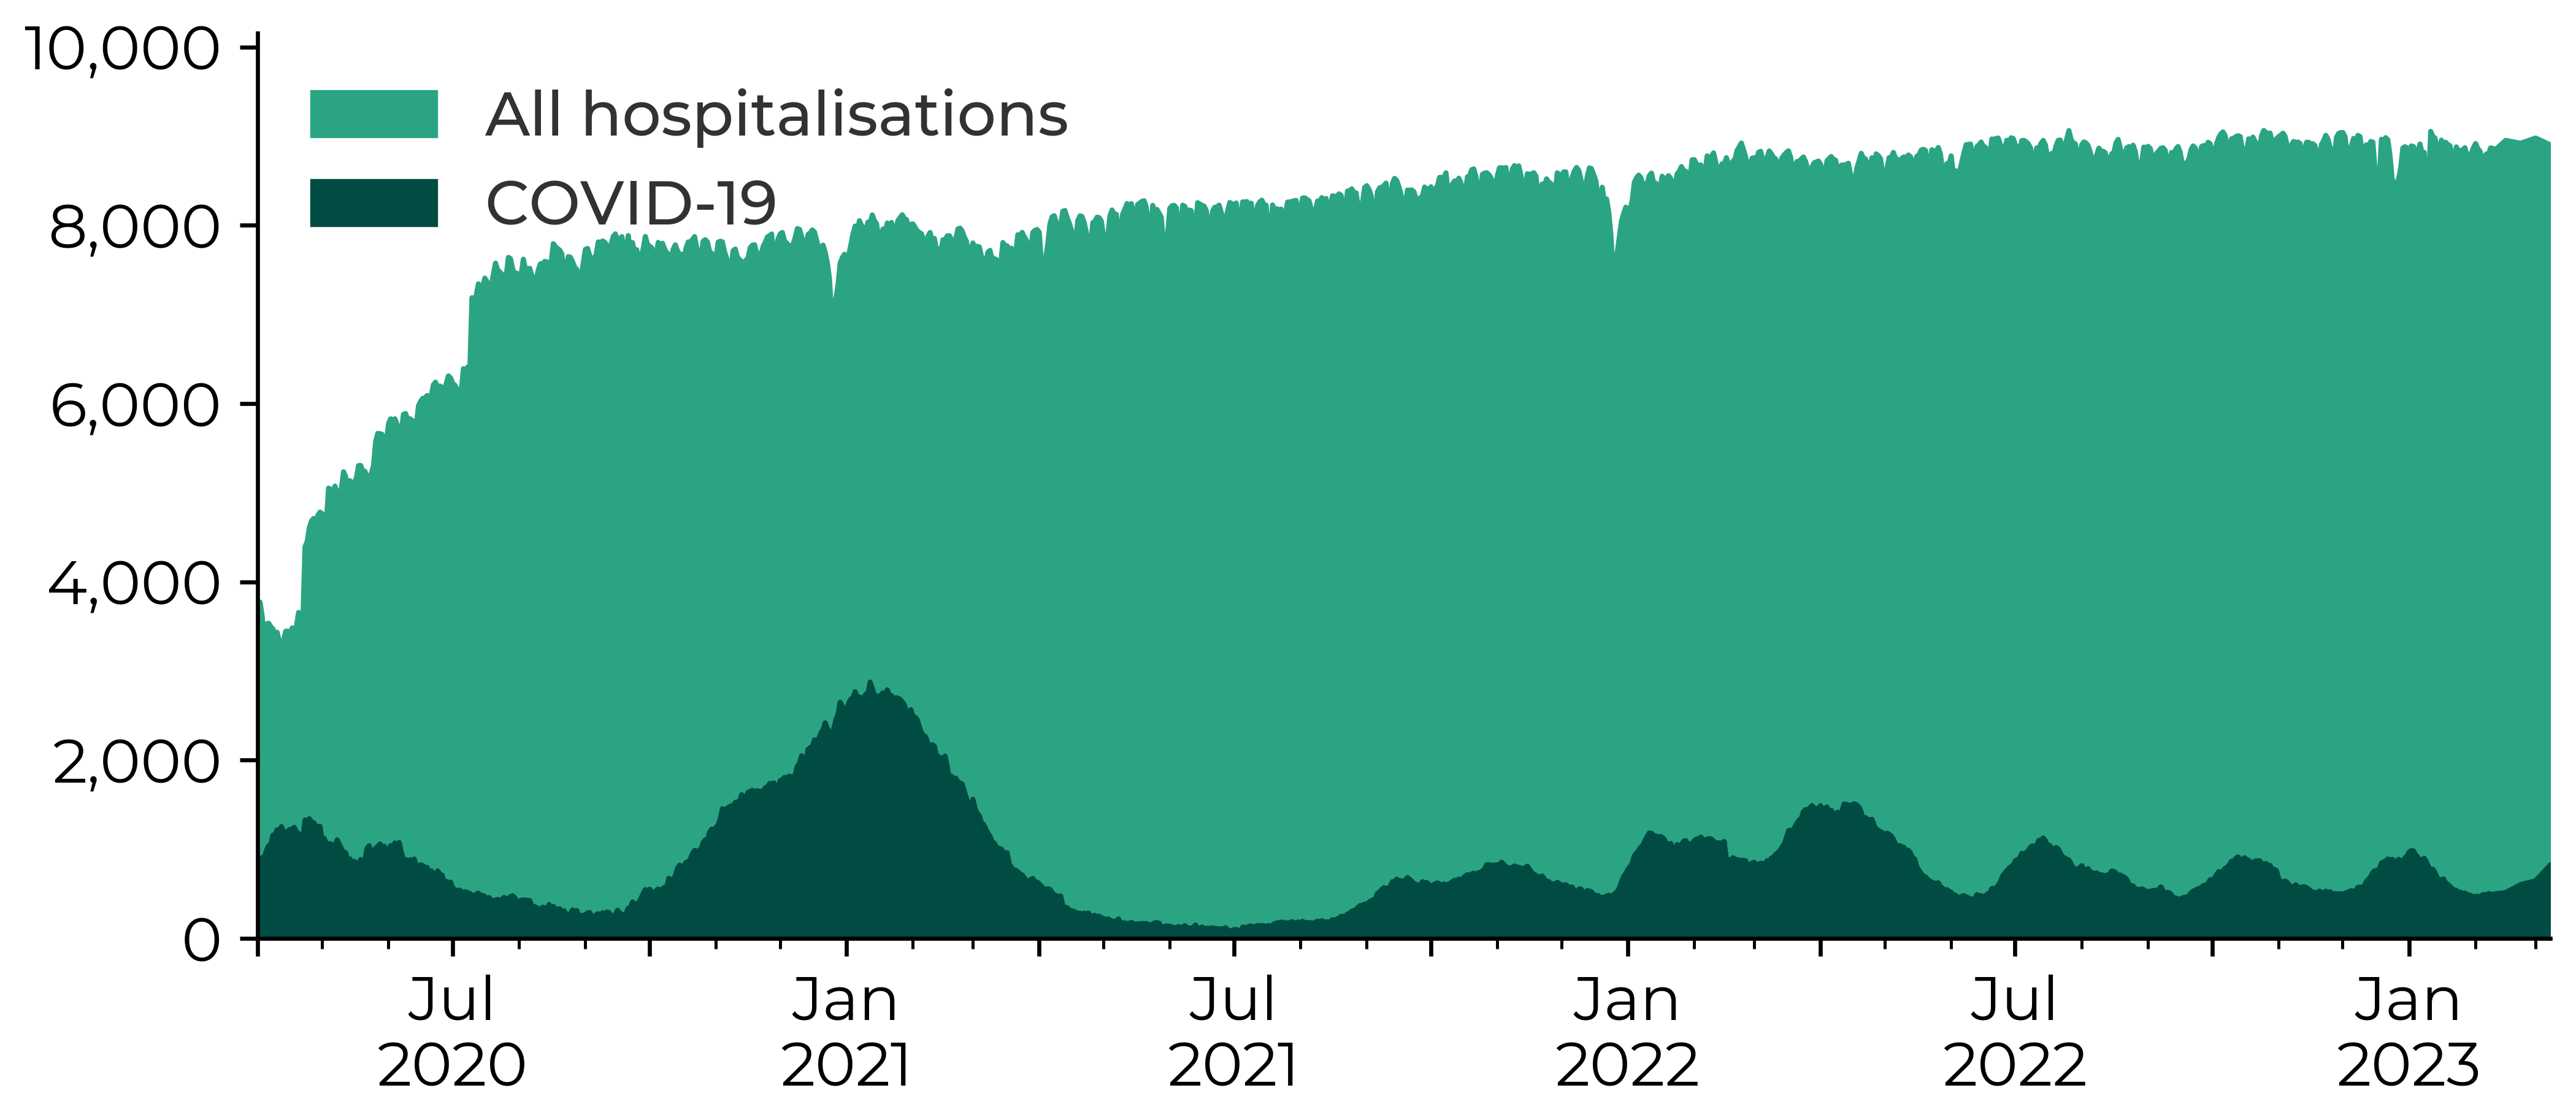 The number of COVID hospitalisations peaked over 1,000 in April 2020 and nearly 3,000 in January 2021. The number reached a minimum in July 2021 and has since fluctuated, typically staying between 500 and 1,500.